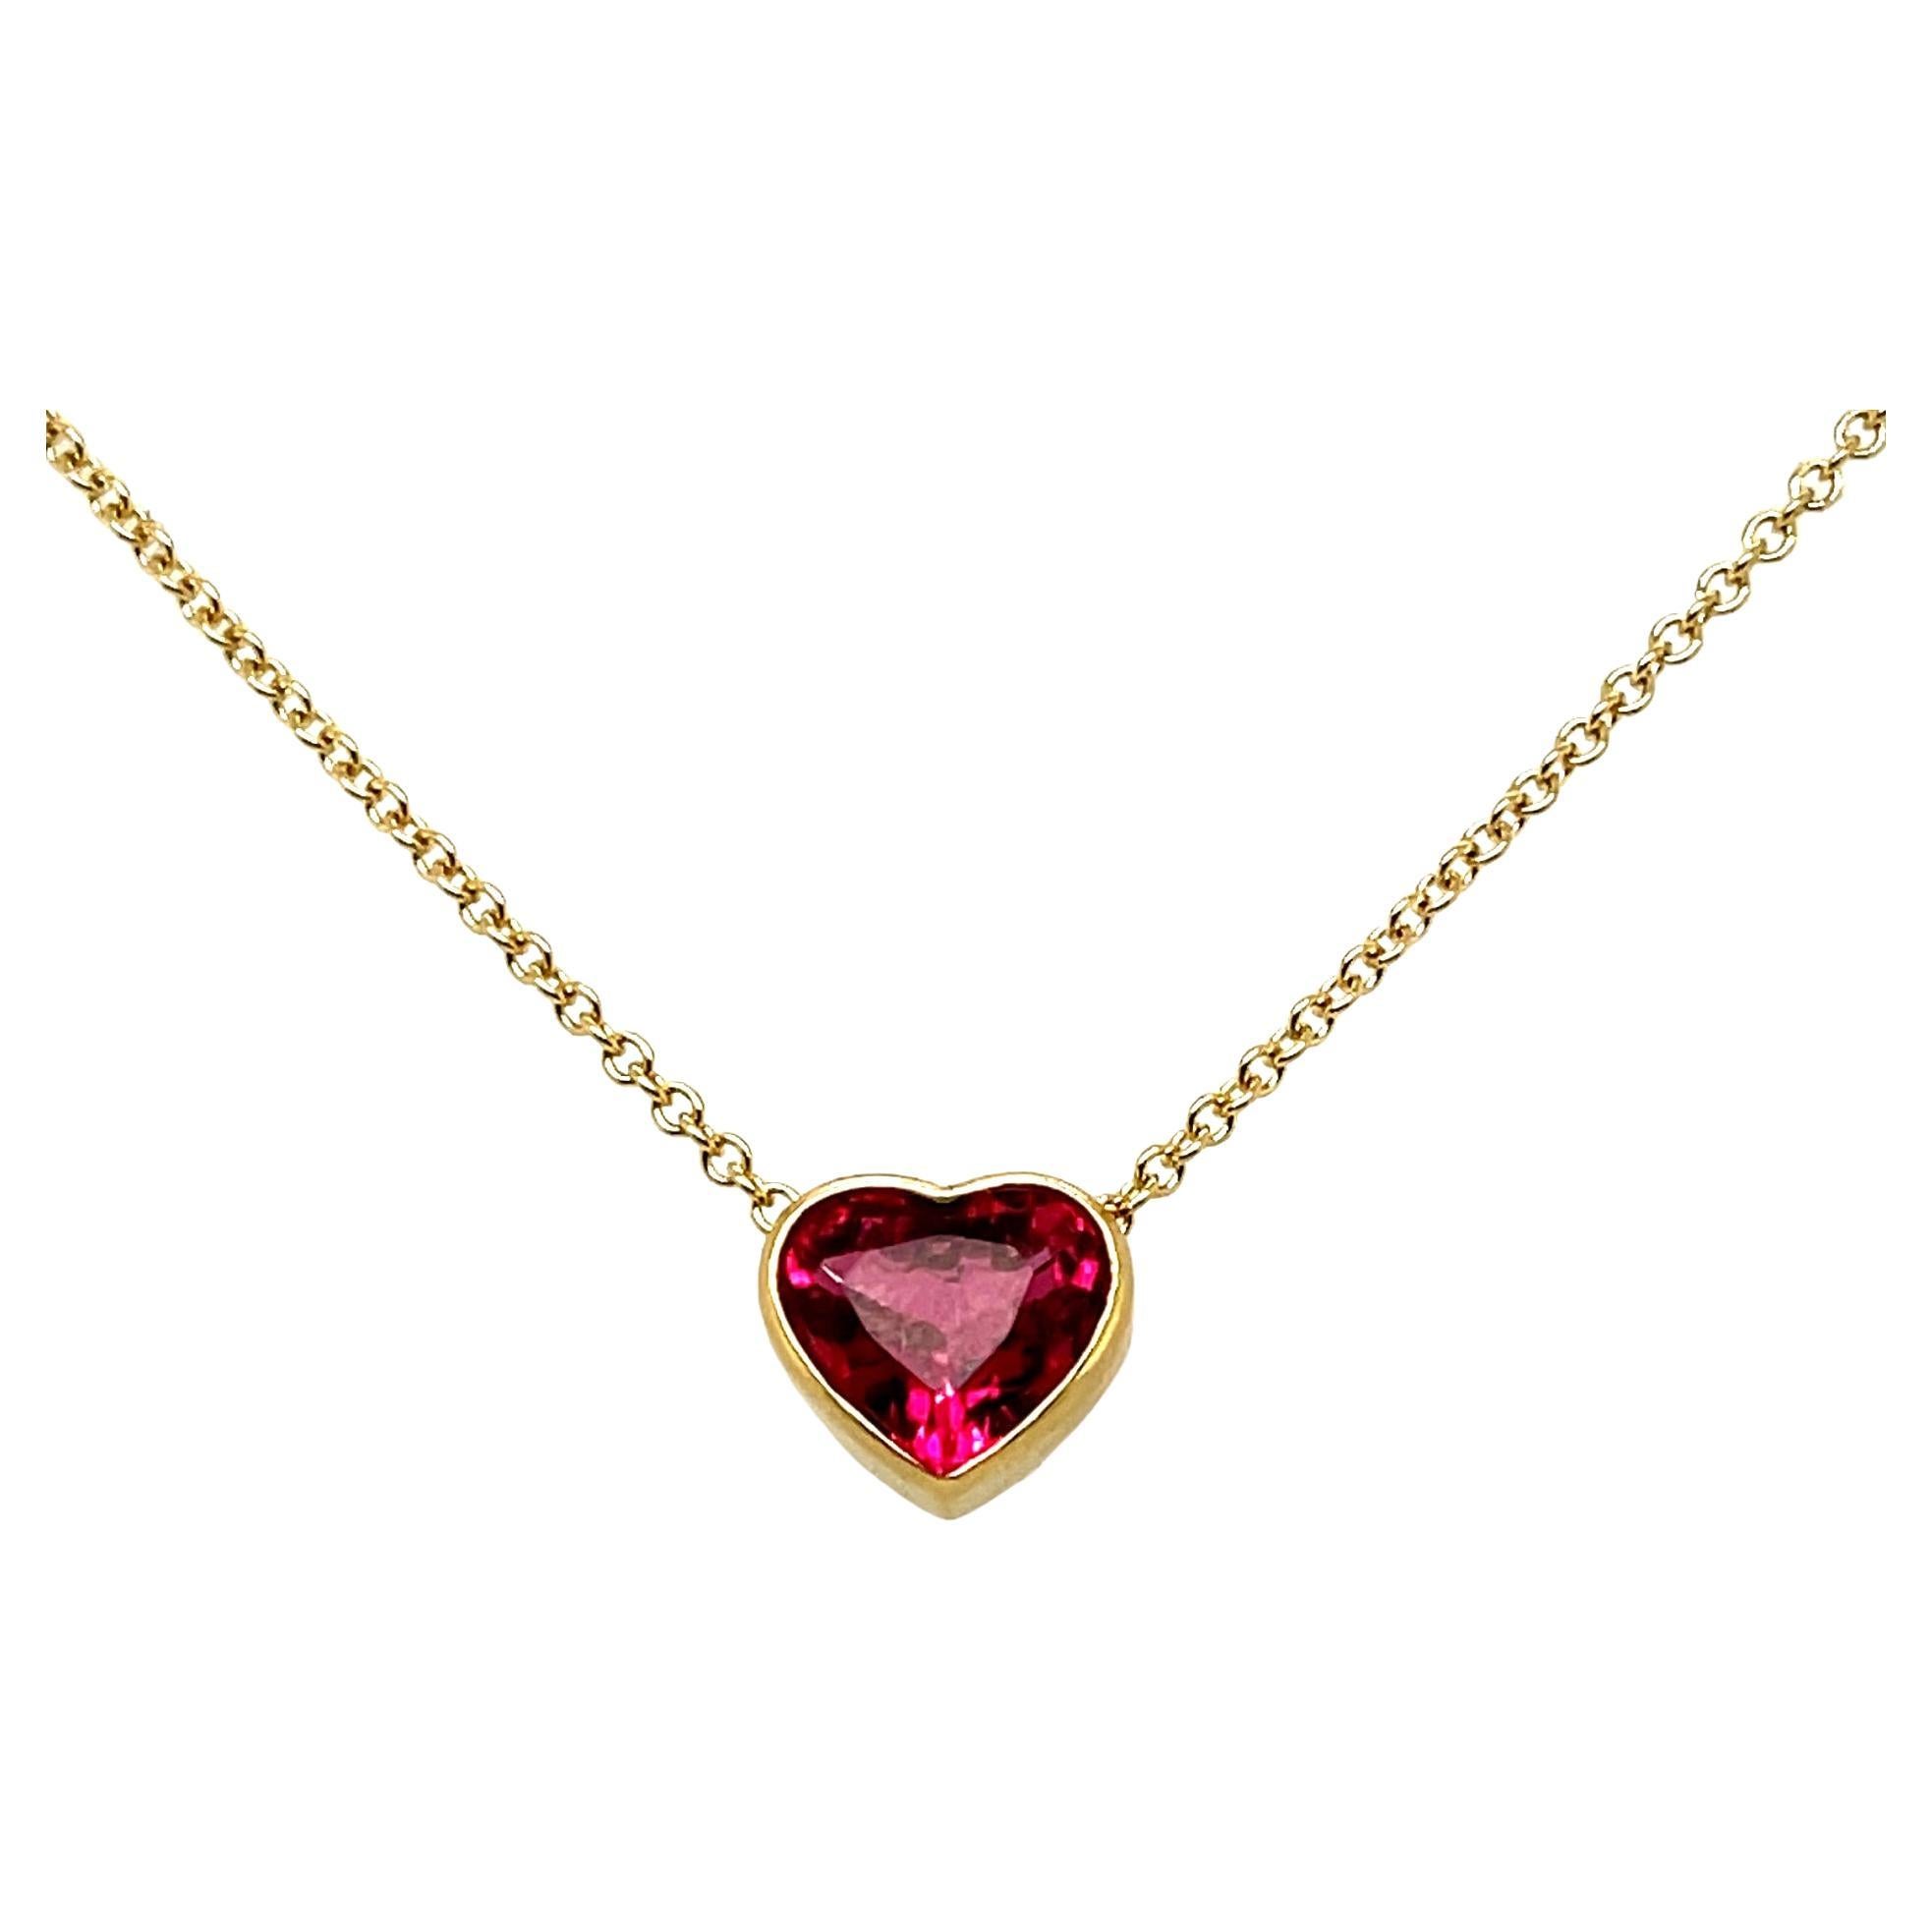 This gorgeous heart-shaped pink rubellite tourmaline necklace is simply dazzling! It features a 1.99 carat striking gem with vivid hot pink color, set in a custom-made 18k yellow gold bezel and suspended on a classic and elegant 18k yellow gold